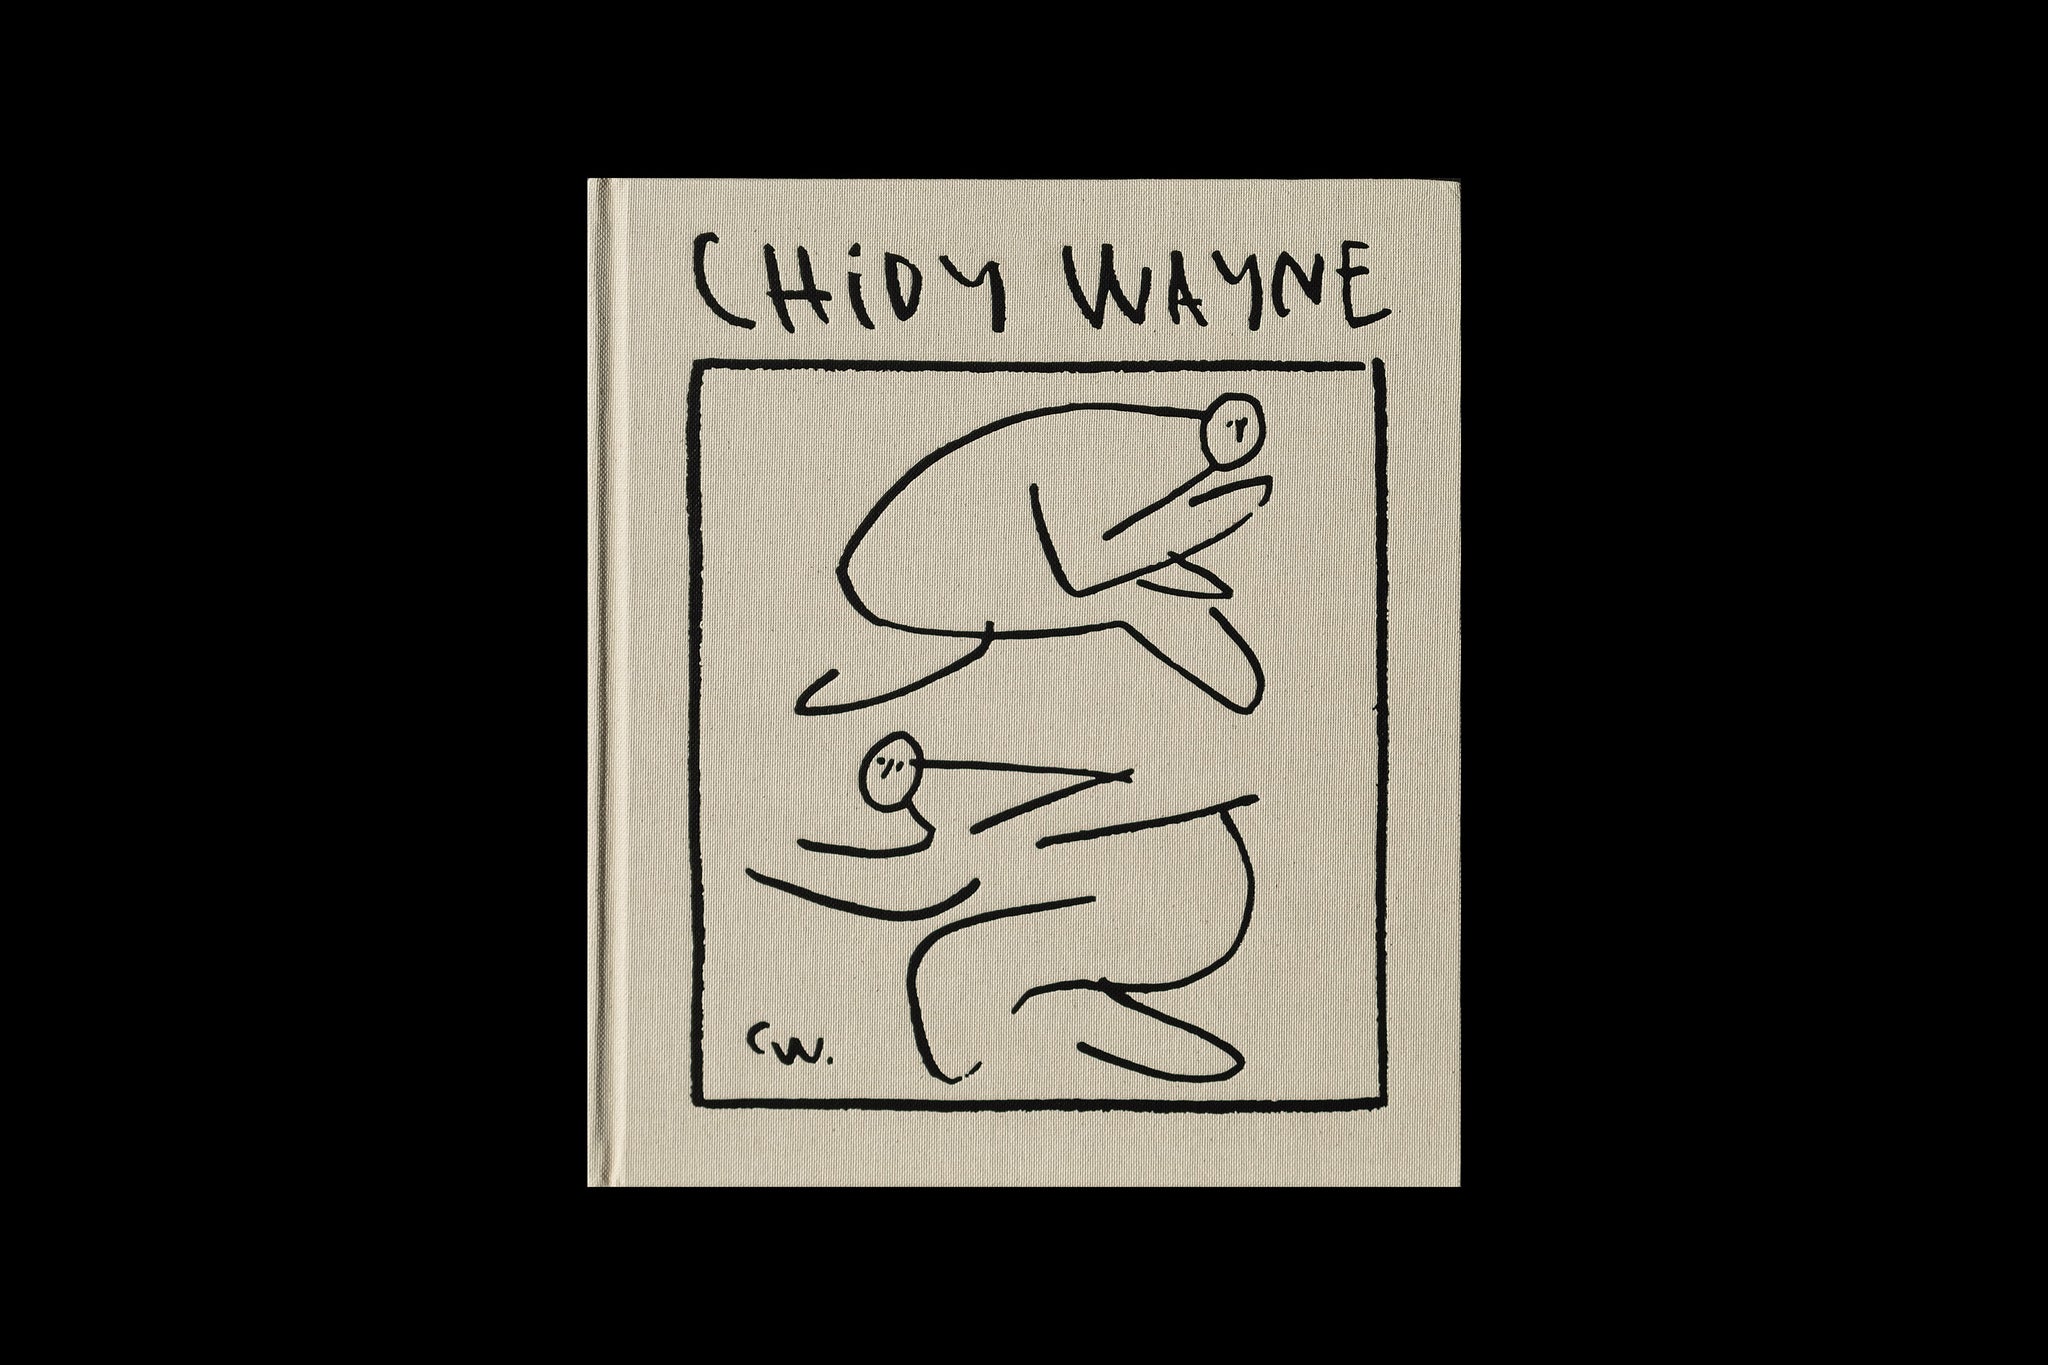 Chidy Wayne: In the Mirror